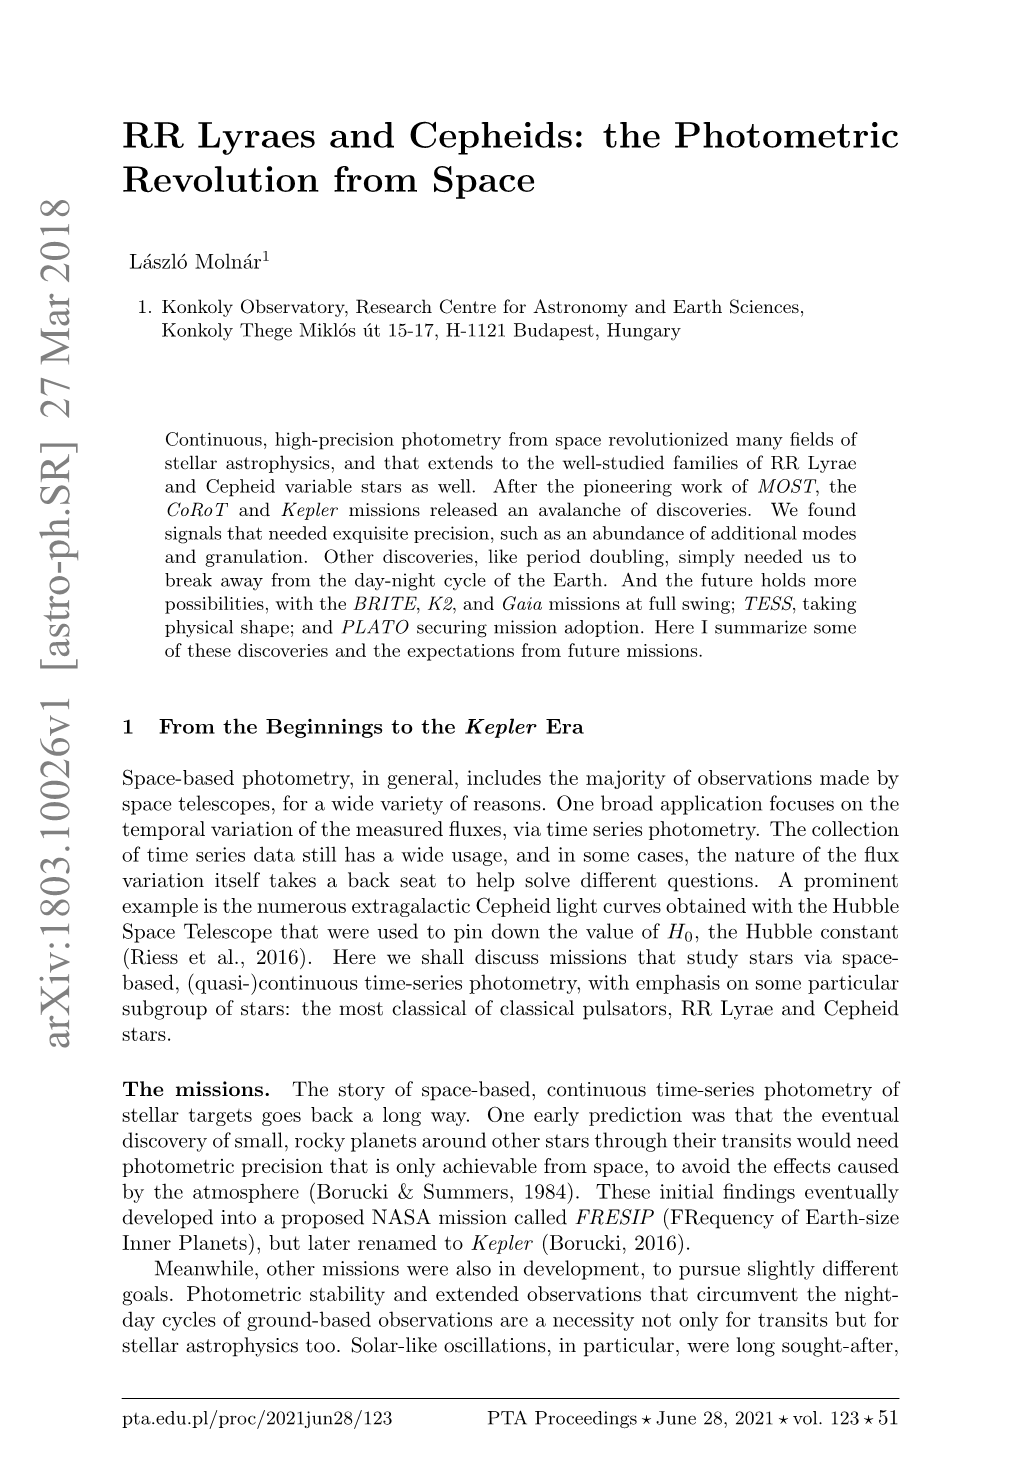 RR Lyraes and Cepheids: the Photometric Revolution from Space